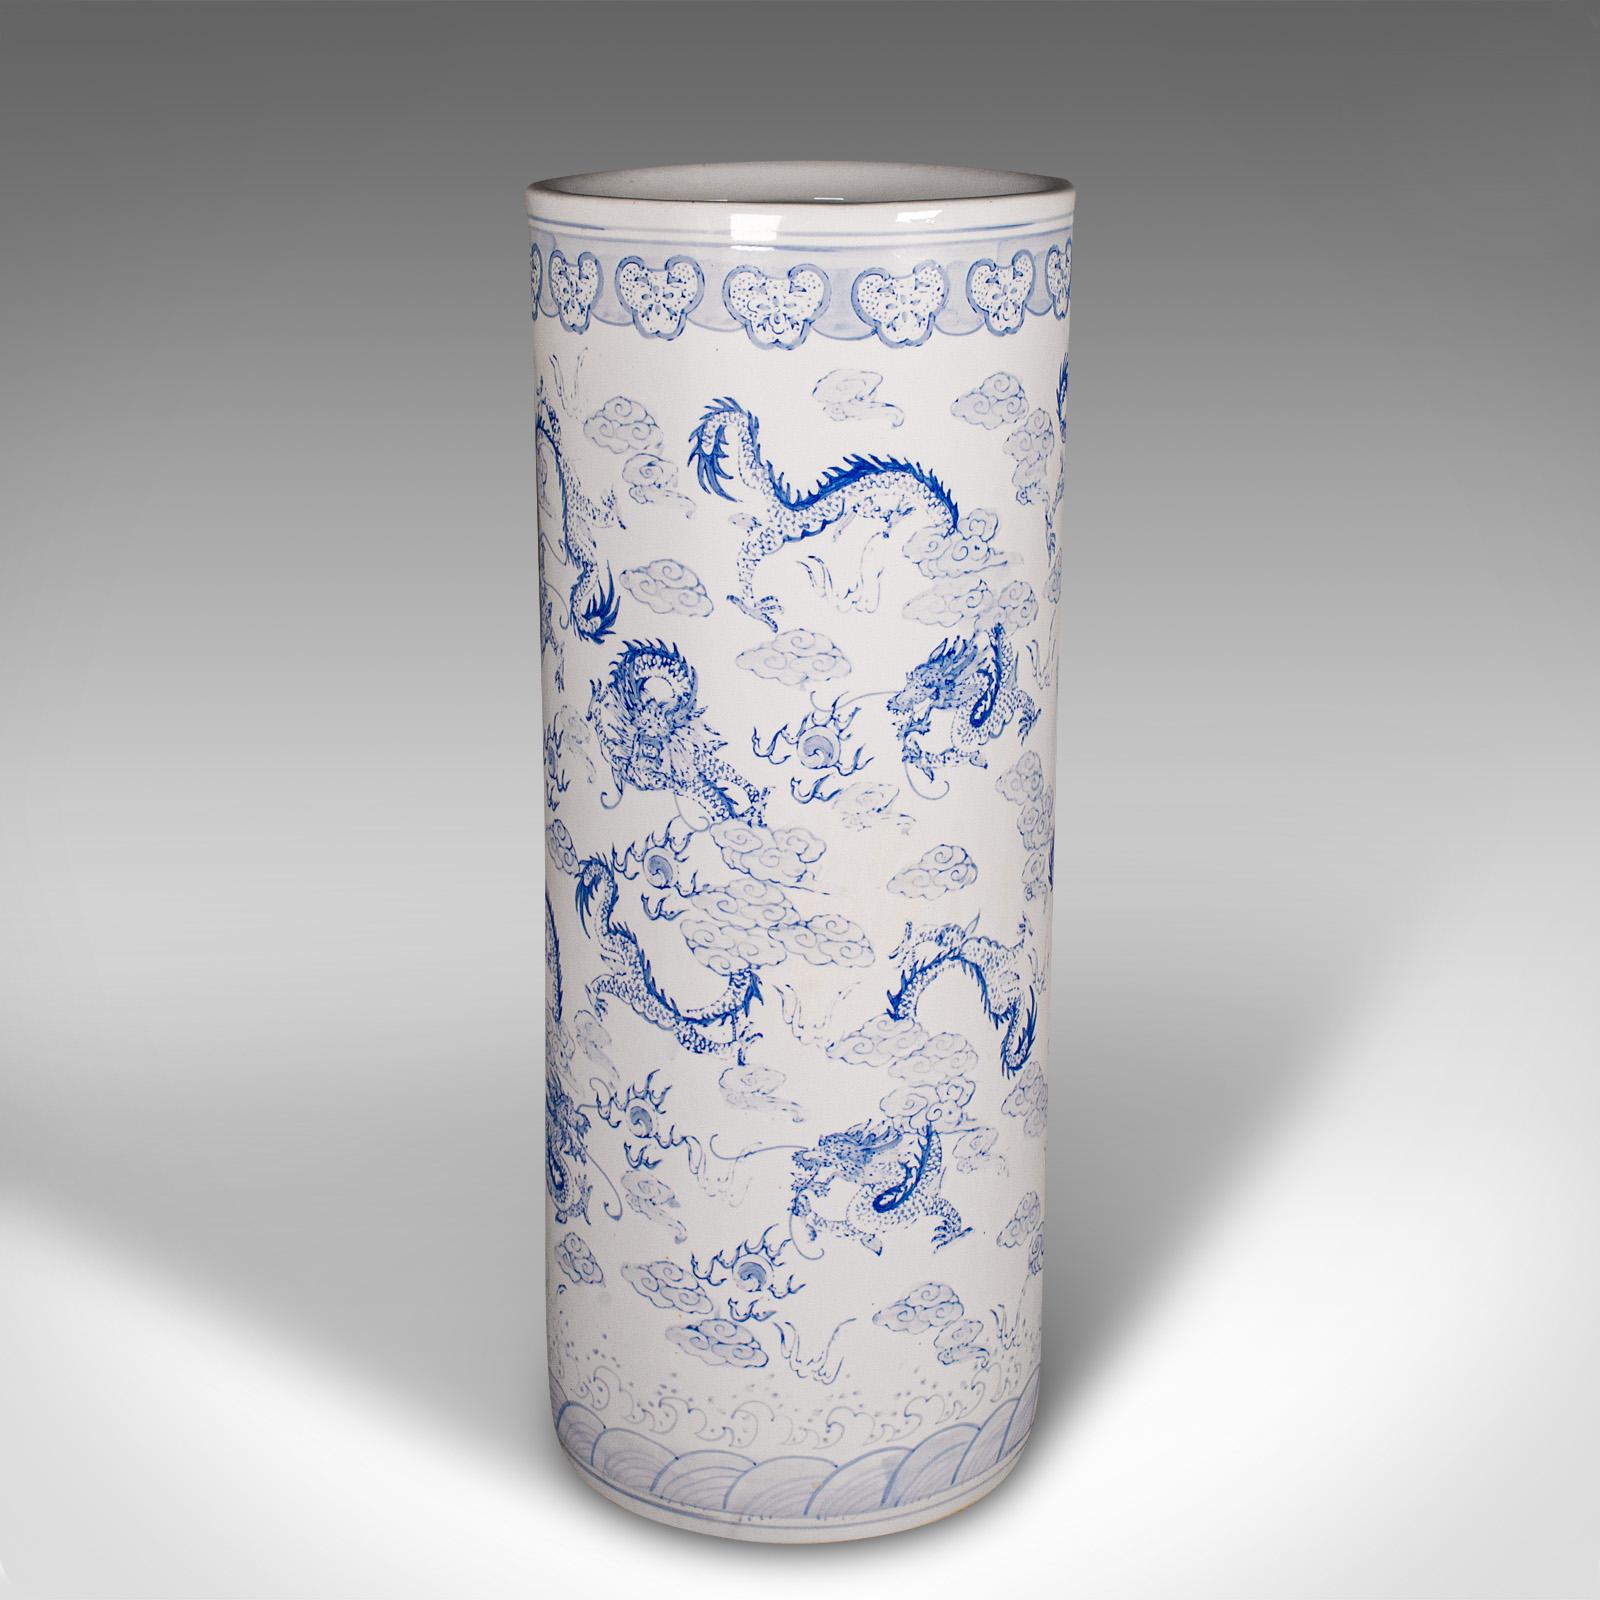 This is a tall vintage blue and white stick stand. A Chinese, ceramic decorative umbrella holder, dating to the mid 20th century, circa 1960.

Wonderfully understated example of Oriental blue and white decor
Displaying a desirable aged patina and in